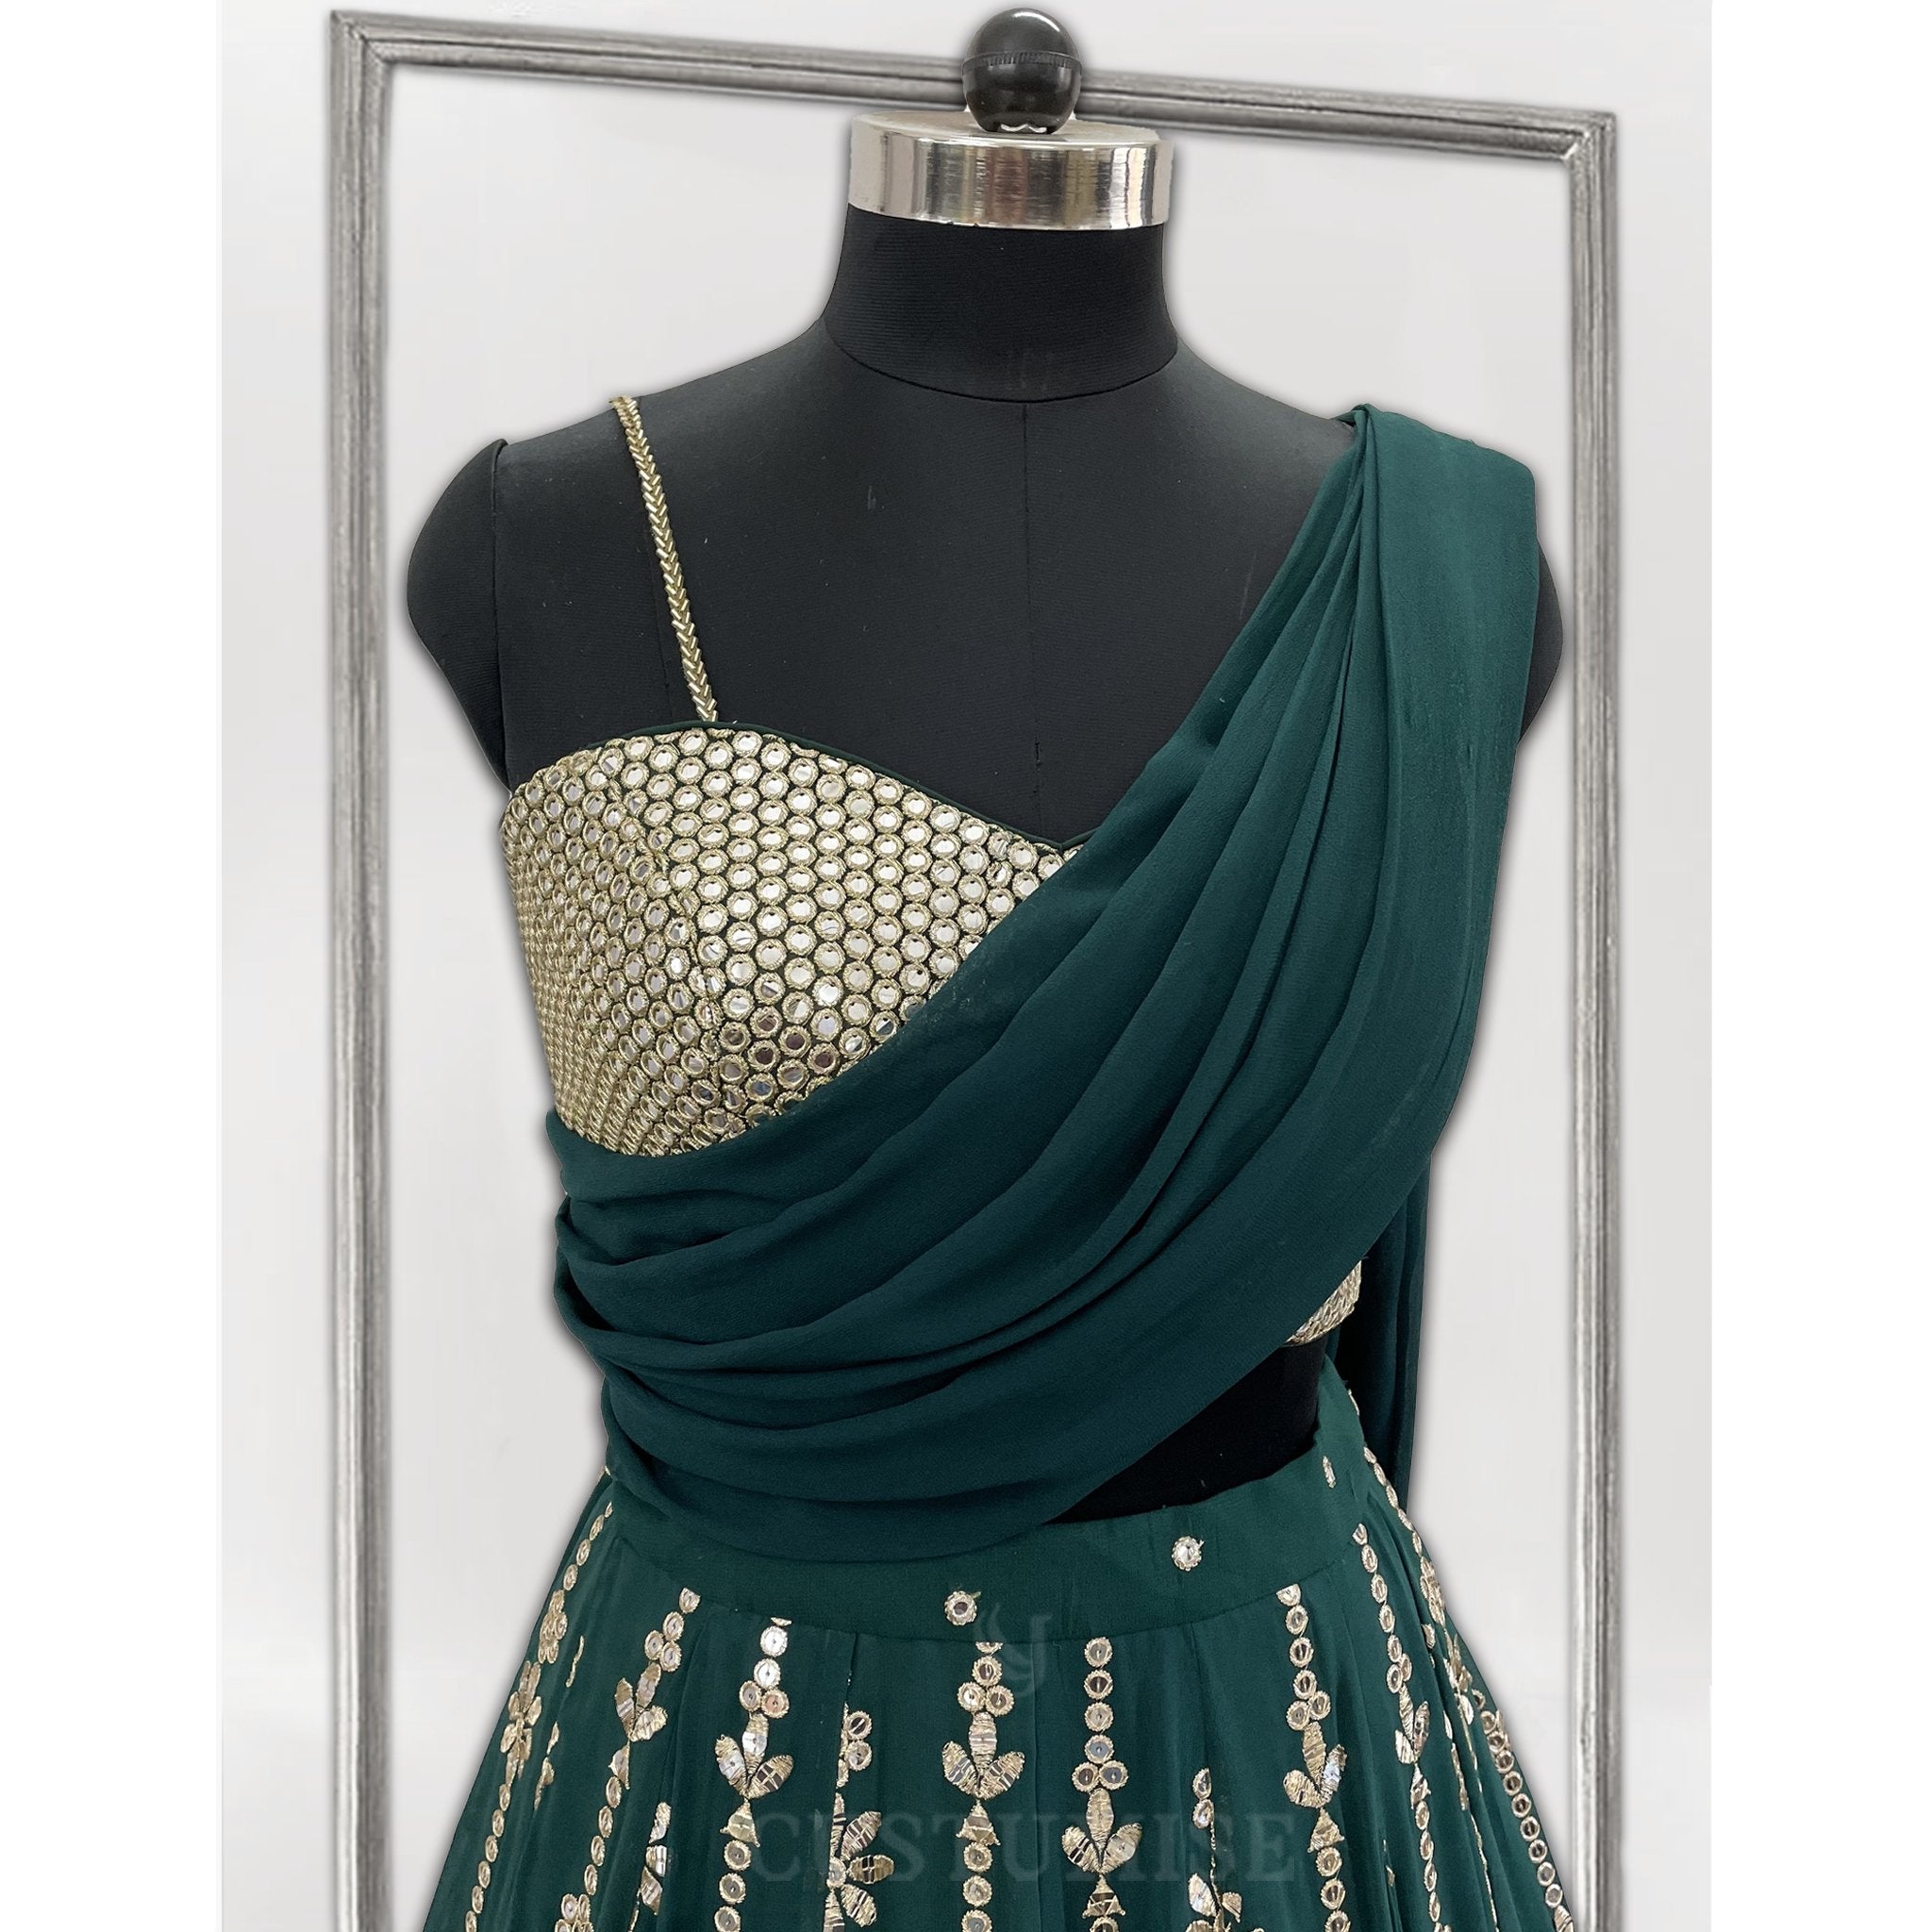 Bottle green Mirror and Sequence Embroidered lehenga - Indian Designer Bridal Wedding Outfit